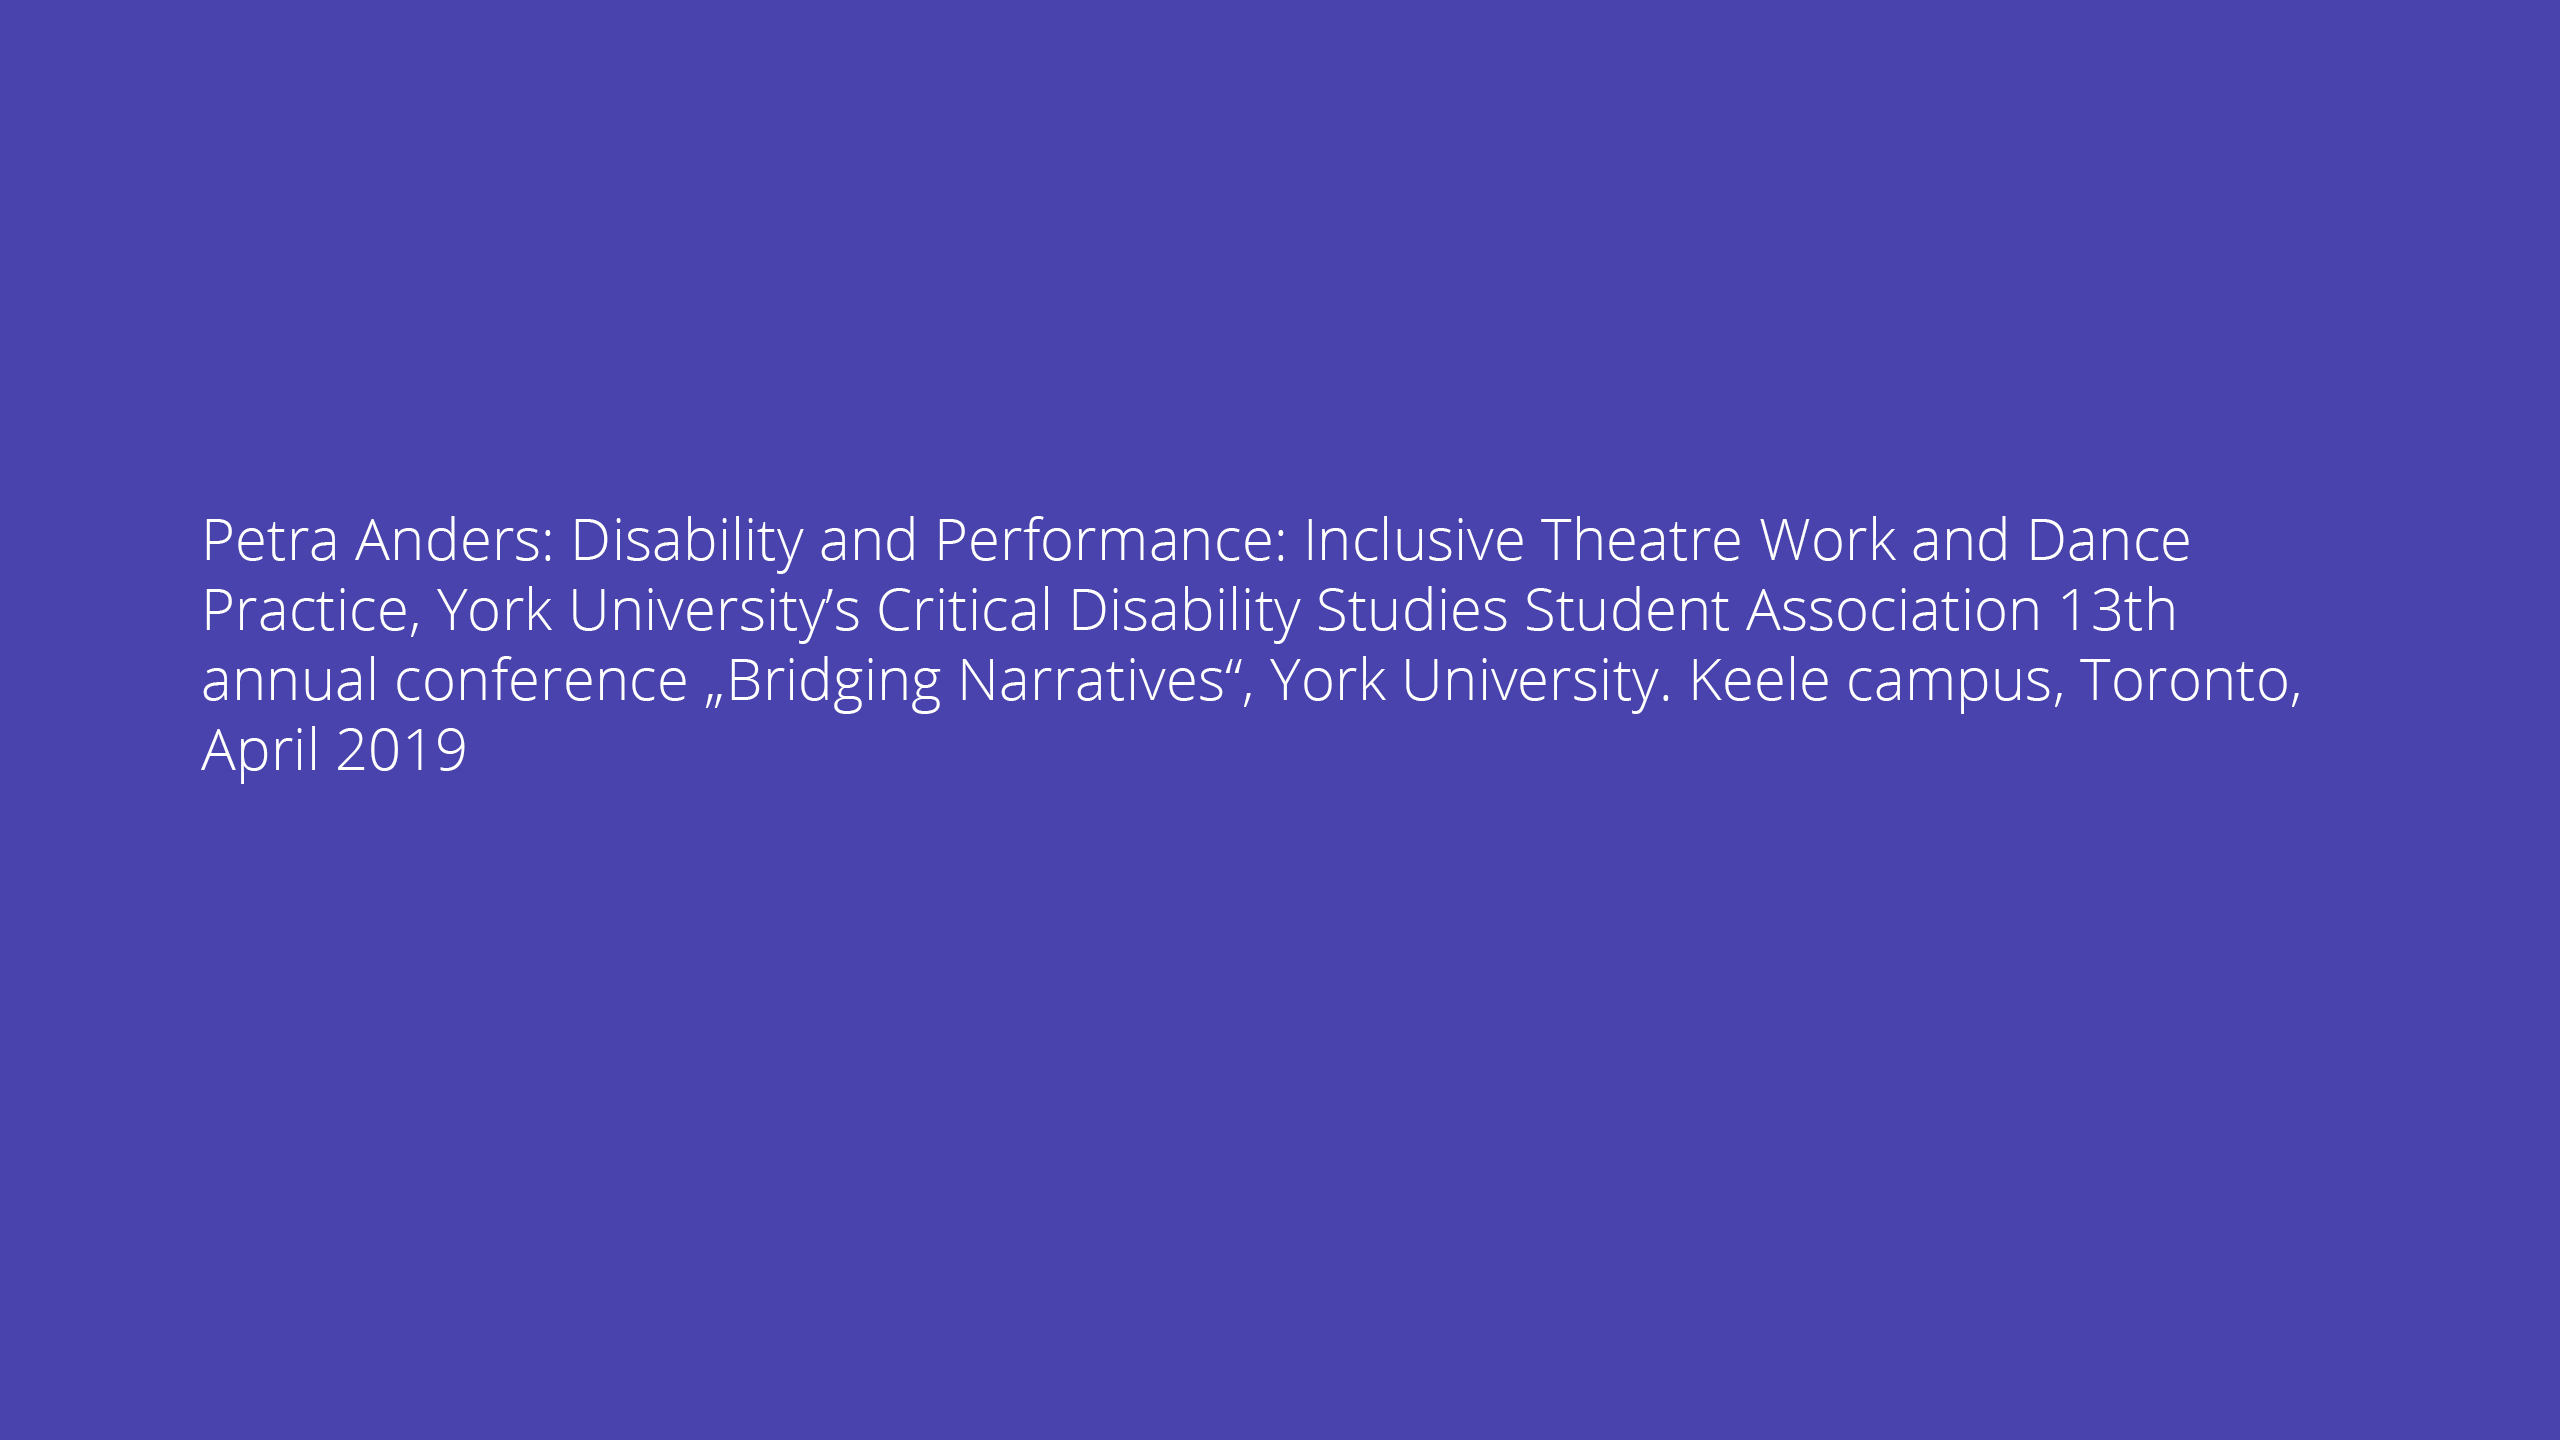 Petra Anders: Disability and Performance: Inclusive Theatre Work and Dance Practice, York University’s Critical Disability Studies Student Association 13th annual conference „Bridging Narratives“, York University. Keele campus, Toronto, April 2019